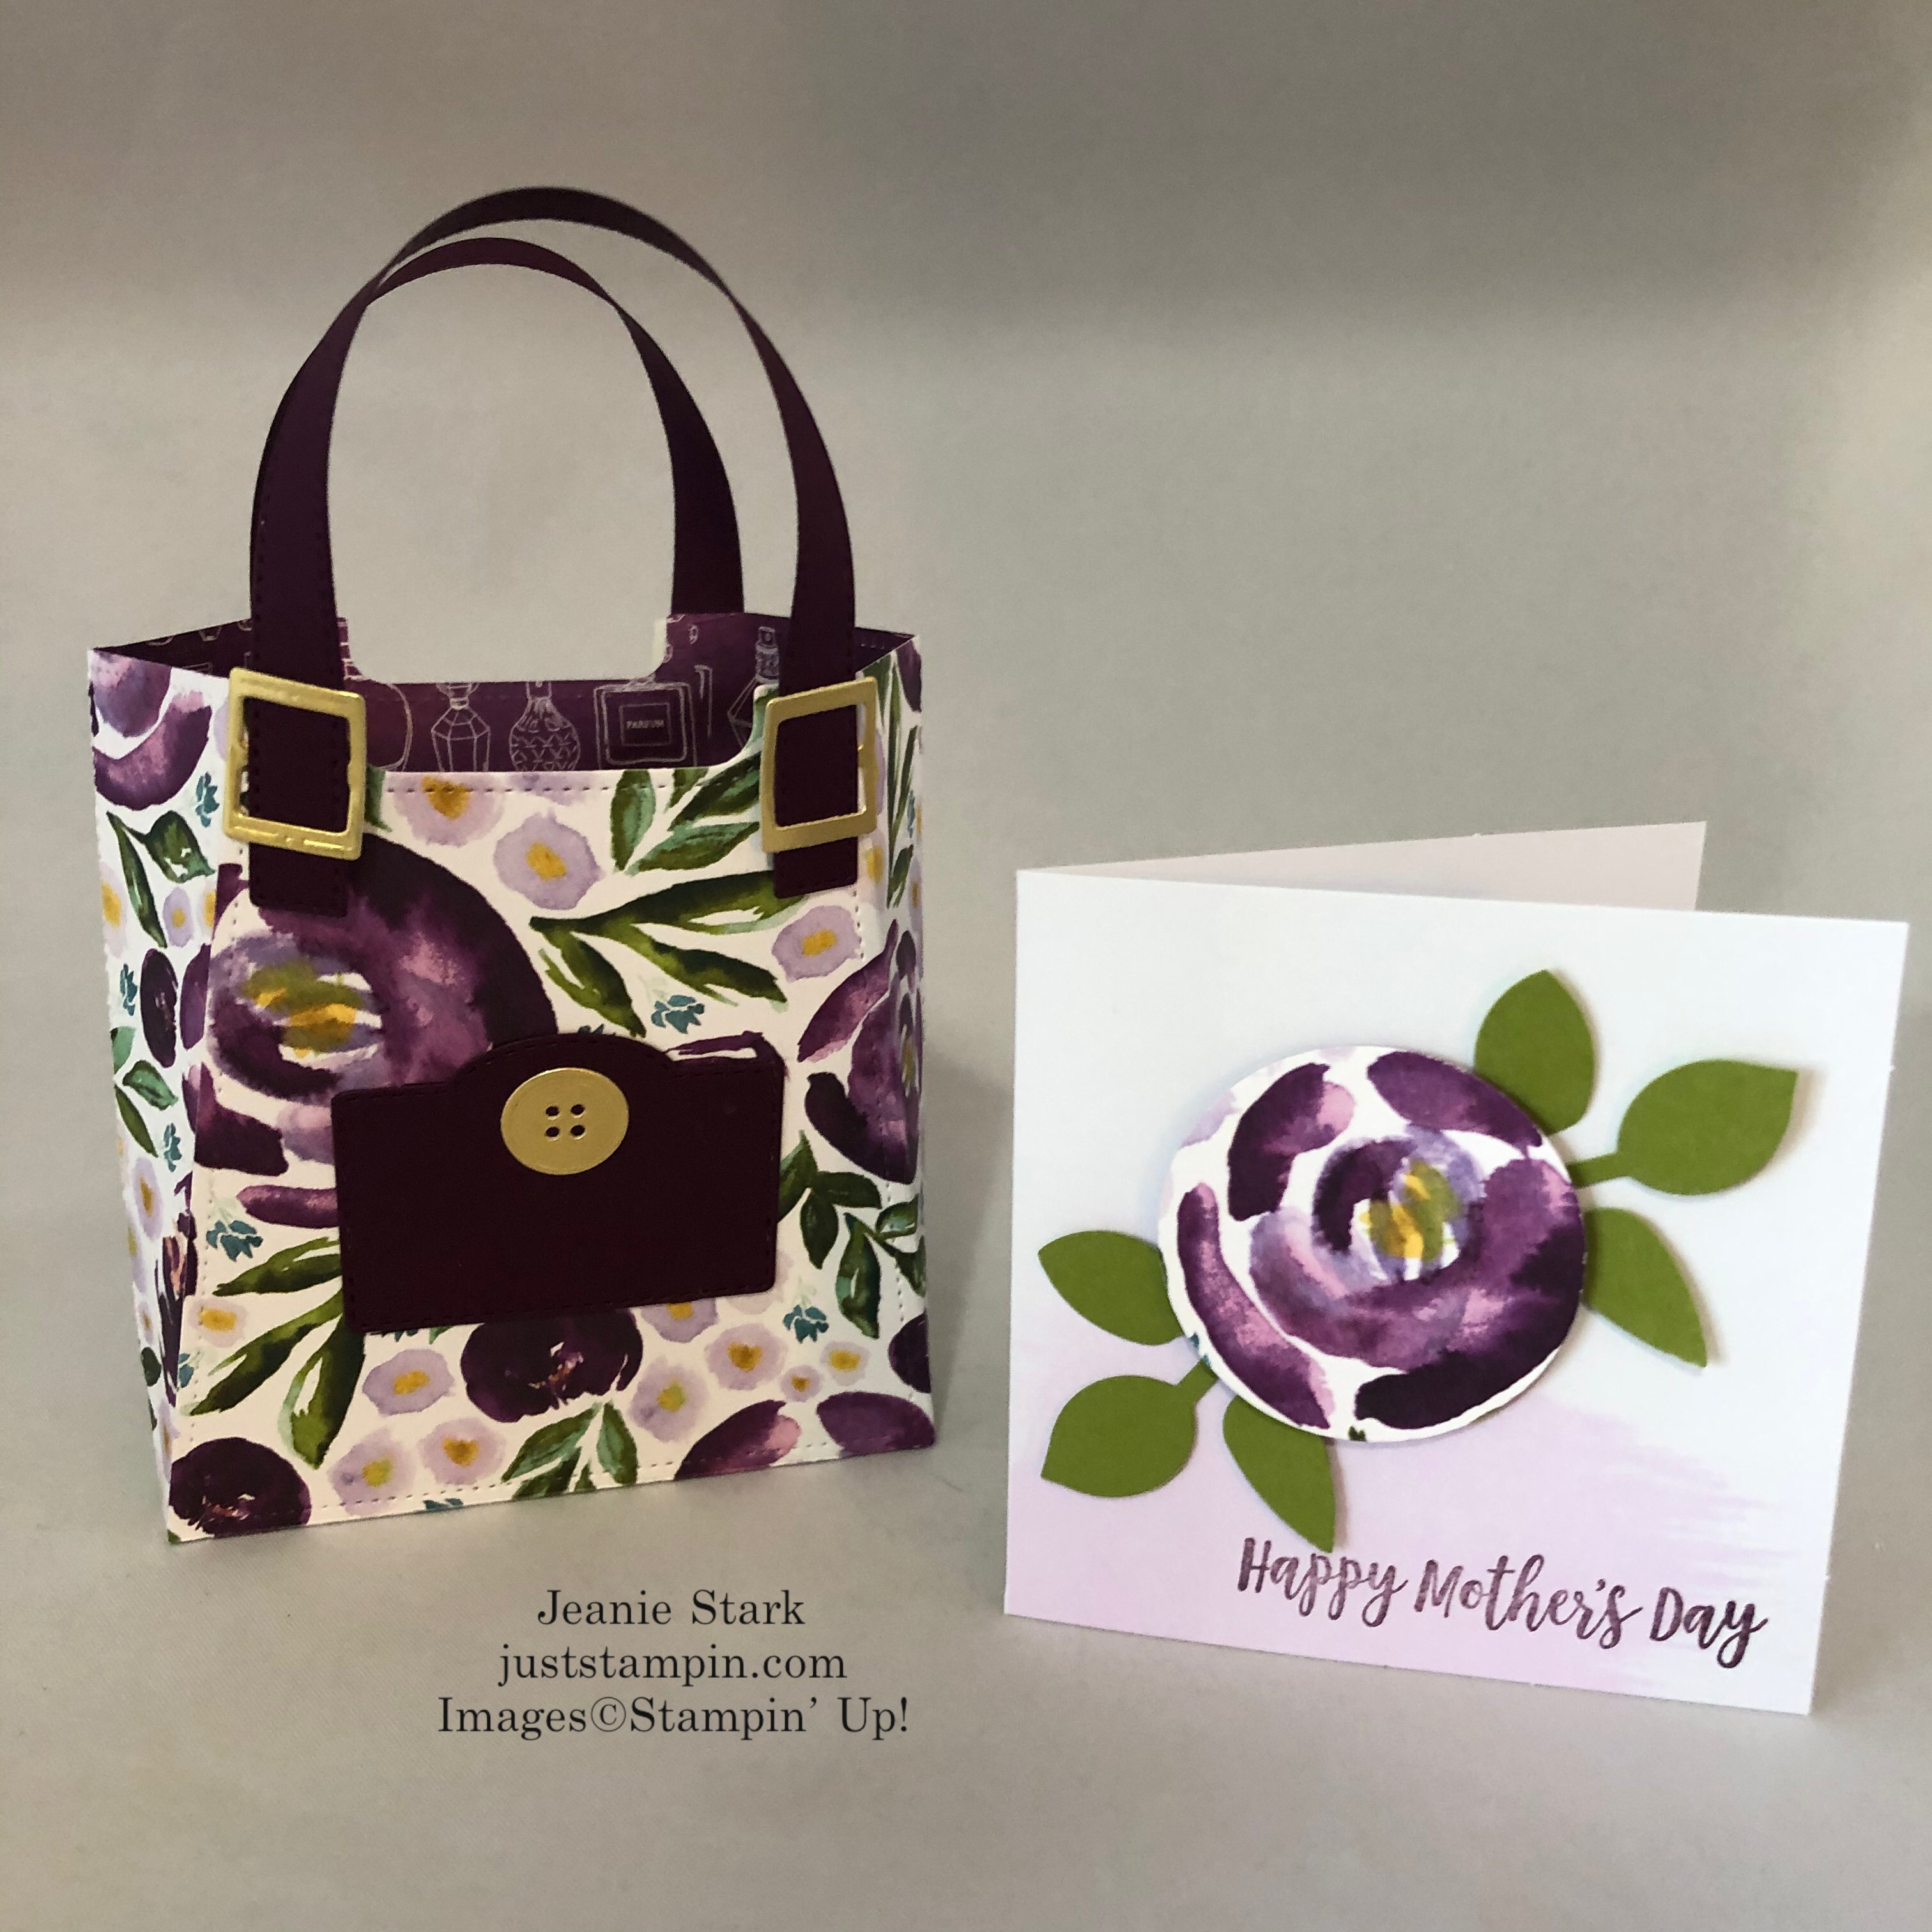 Stampin' Up! All Dressed Up purse and note card idea for Mother's Day - Jeanie Stark StampinUp